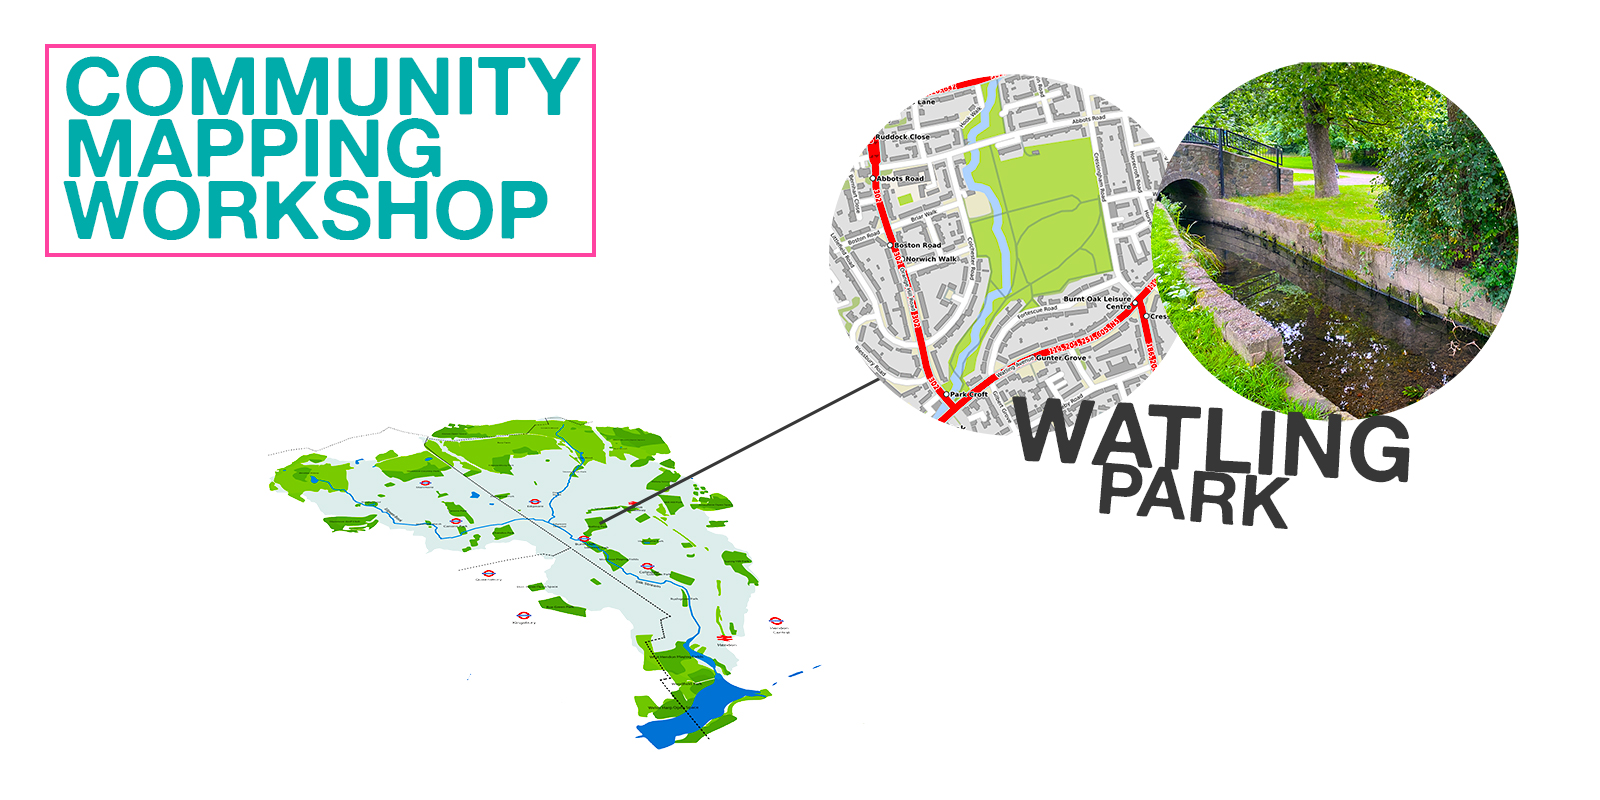 Map of Watling Park in the Silk Stream catchment